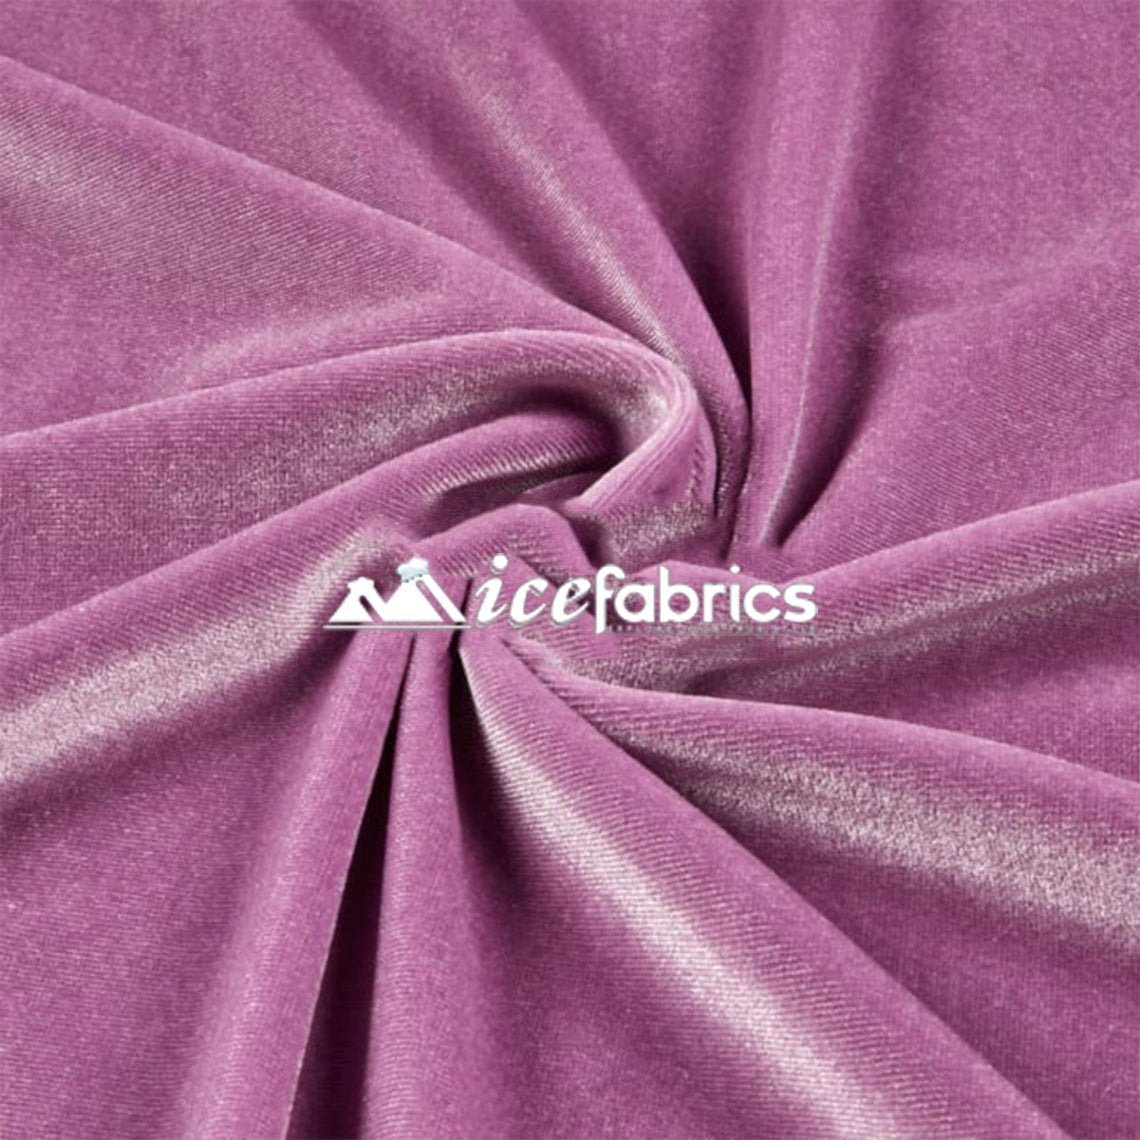 Hight Quality Stretch Velvet Fabric By The Roll (20 yards) Wholesale FabricVelvet FabricICE FABRICSICE FABRICSLilacBy The Roll (60" Wide)Hight Quality Stretch Velvet Fabric By The Roll (20 yards) Wholesale Fabric ICE FABRICS Lilac